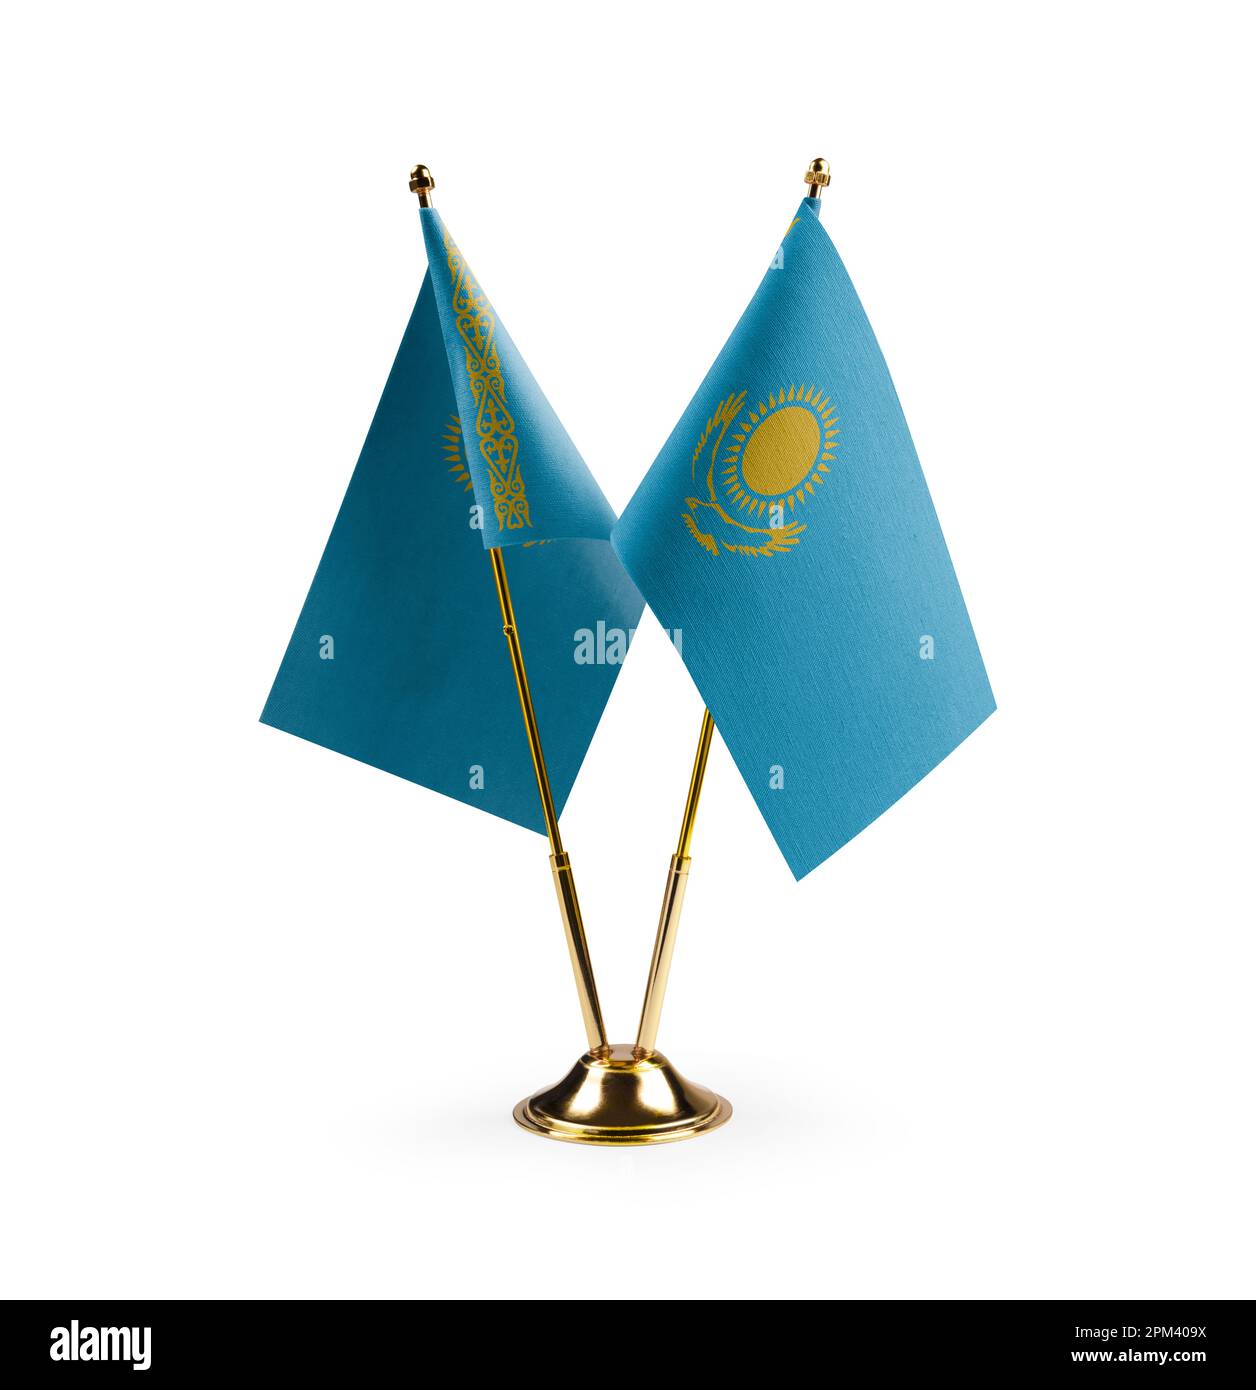 Small national flags of the Kazakhstan on a white background Stock Photo -  Alamy